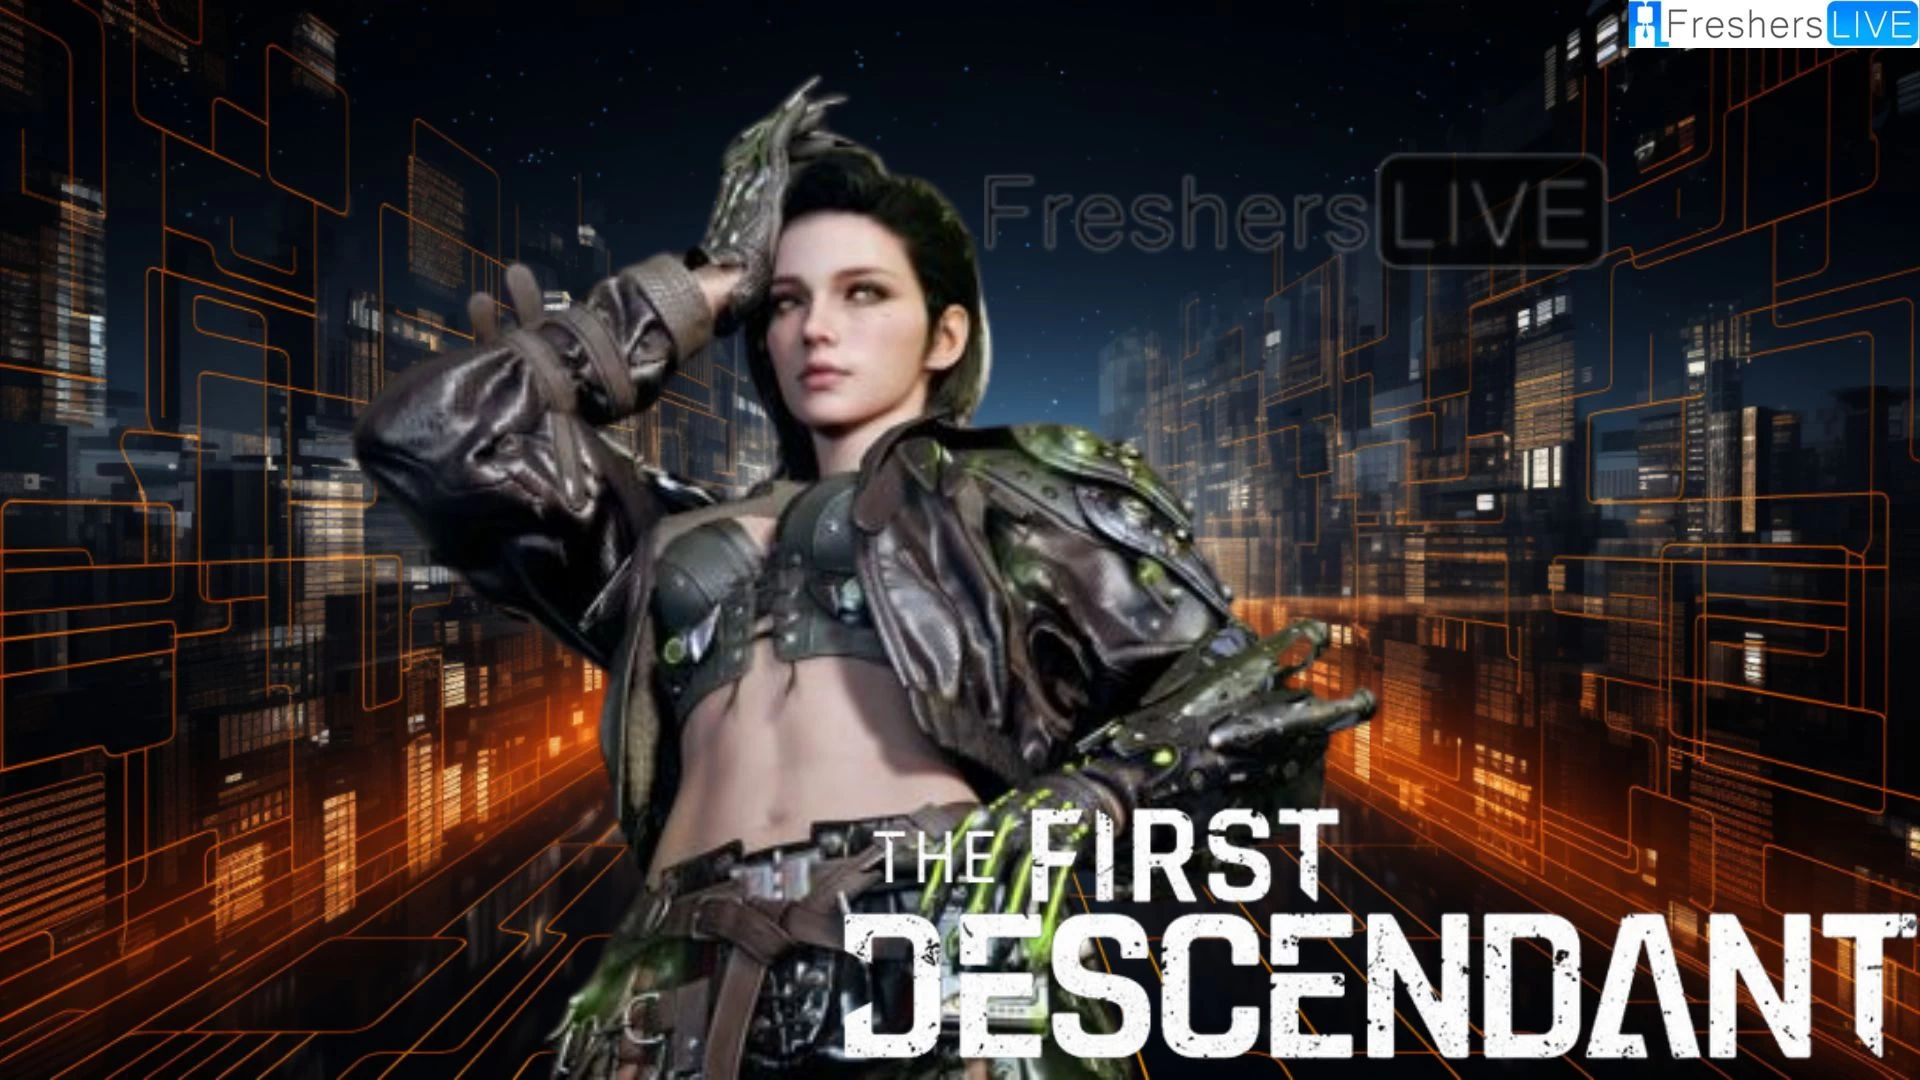 How To Unlock The Freyna in The First Descendant? The First Descendant Freyna Build Guide